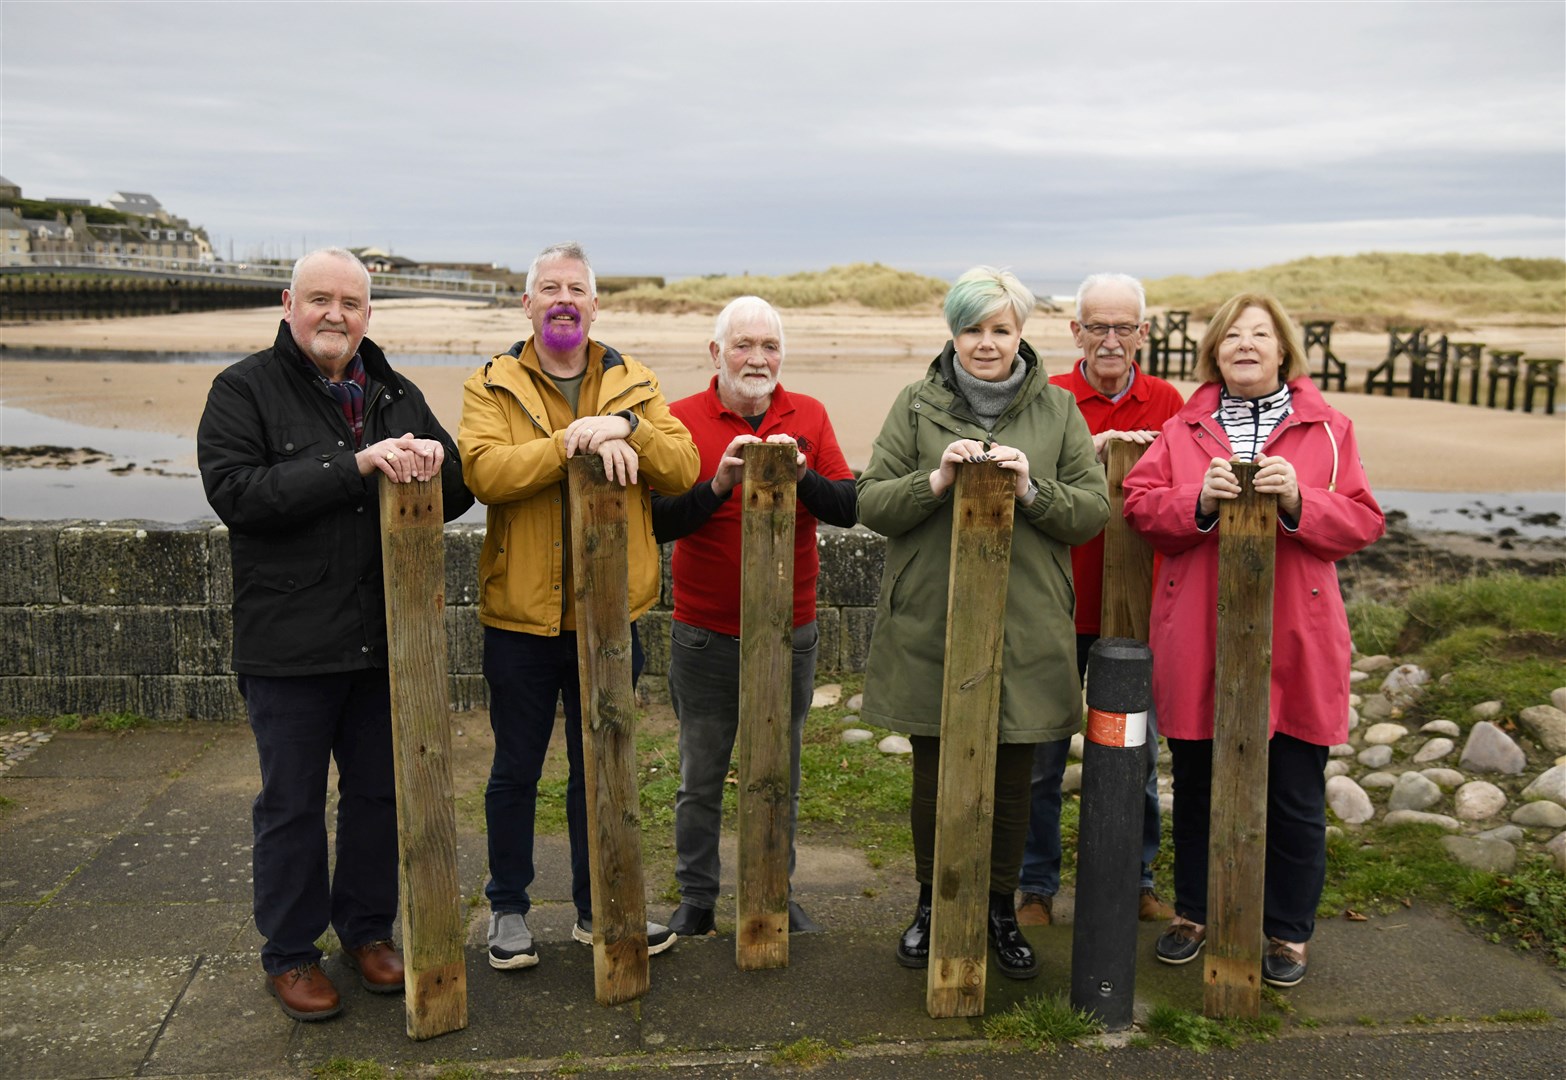 From left: Rab Forbes (Lossiemouth Community Development Trust), George McLean, Pete Weatherhead (Elgin Men's Shed), Donna McLean (Memeber of Lossiemouth Business Association), Davie Bain (Elgin Men's Shed) and Lily Mulholland are selling parts of the old bridge at Lossiemouth for charities...Picture: Beth Taylor.